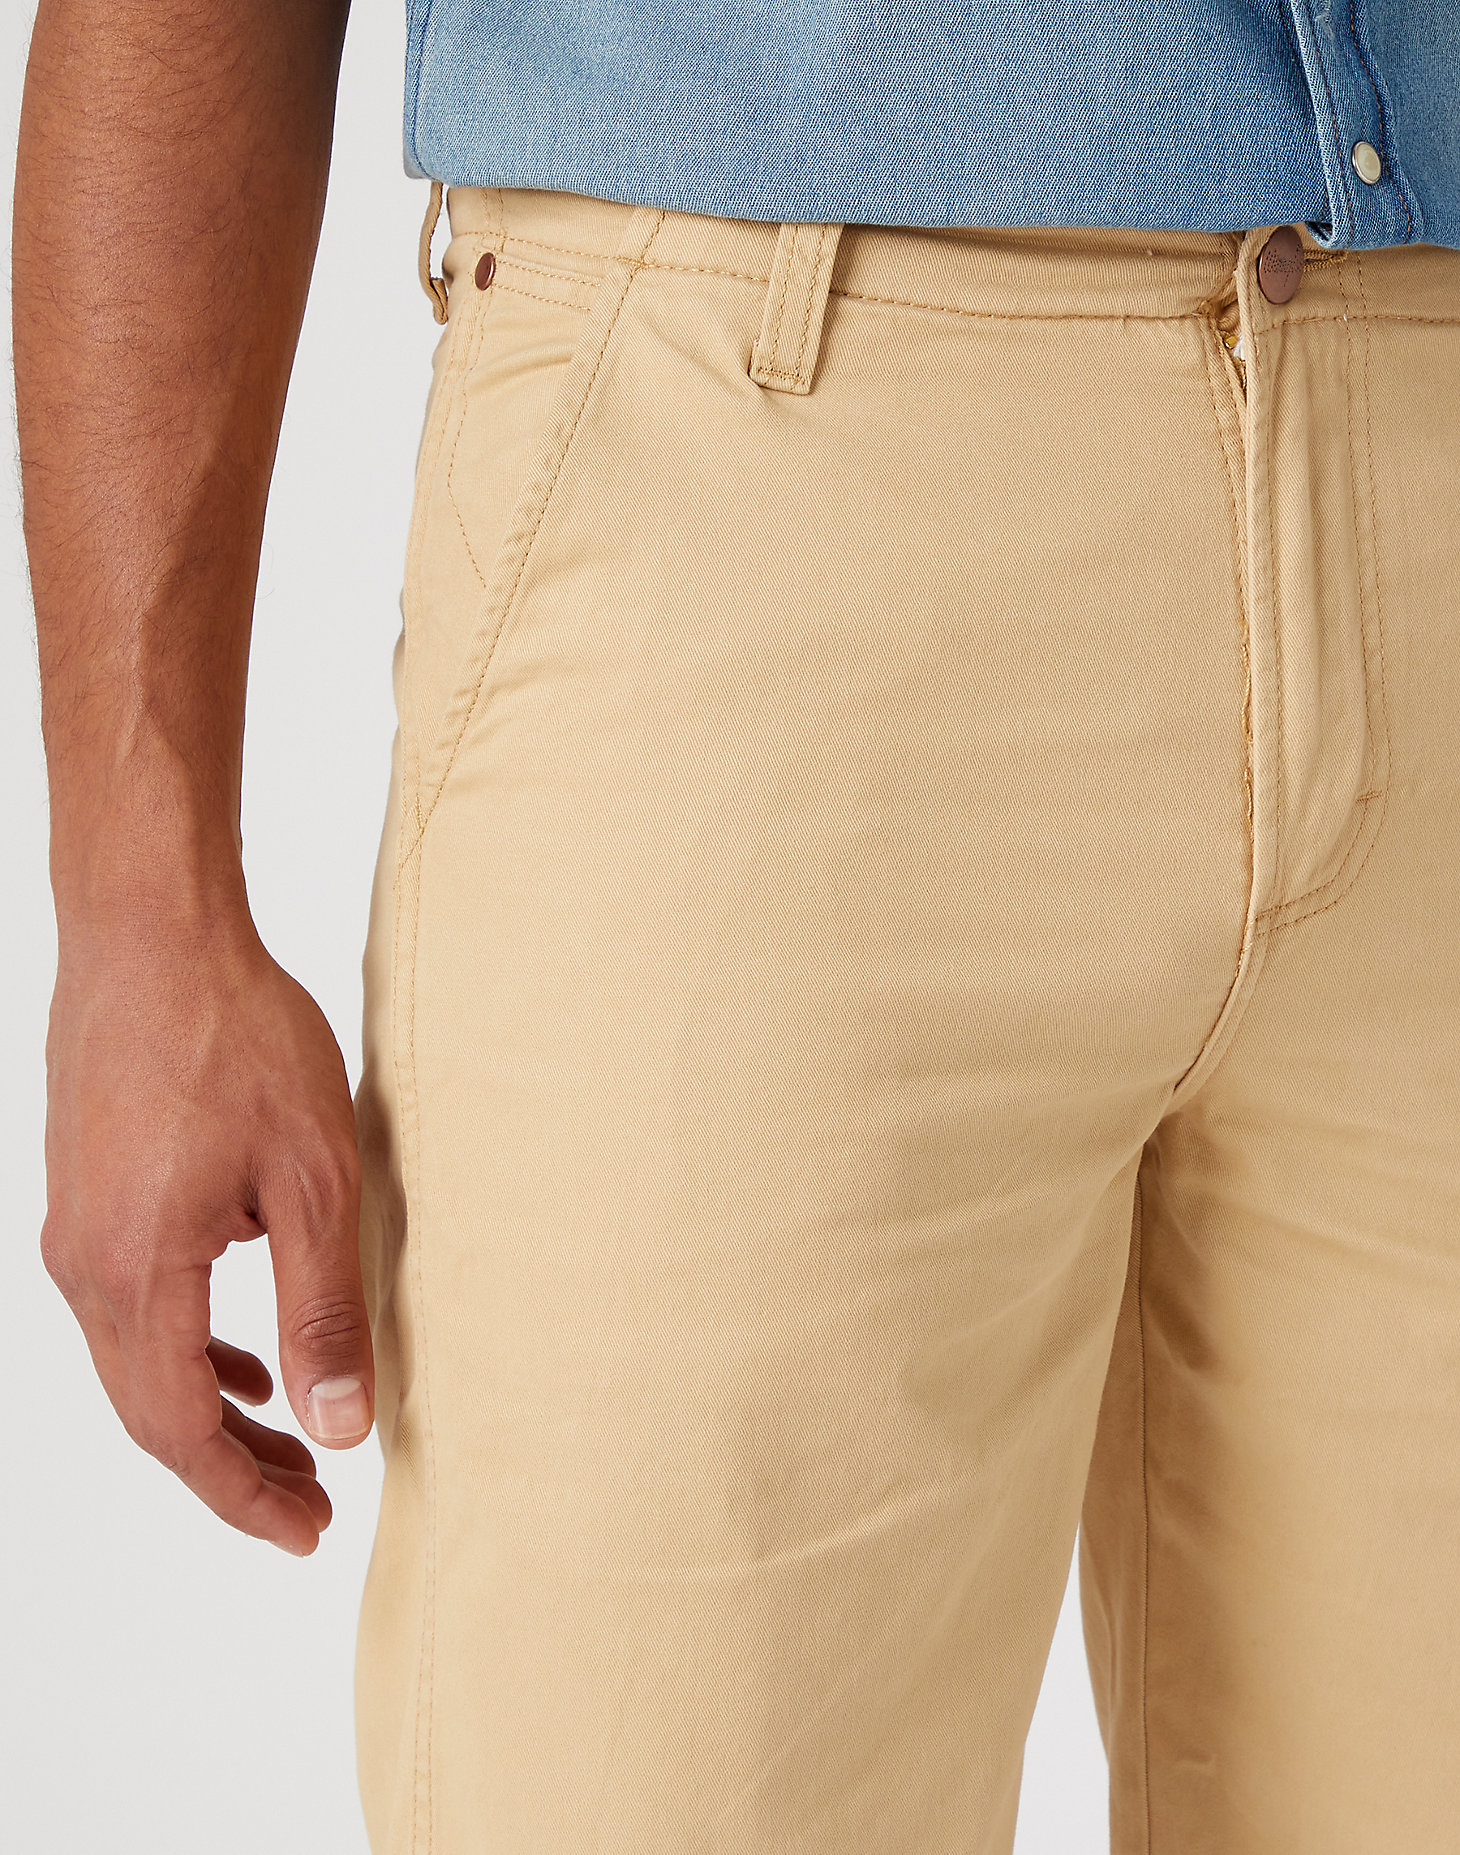 Casey Chino Shorts in Taos Taupe alternative view 4